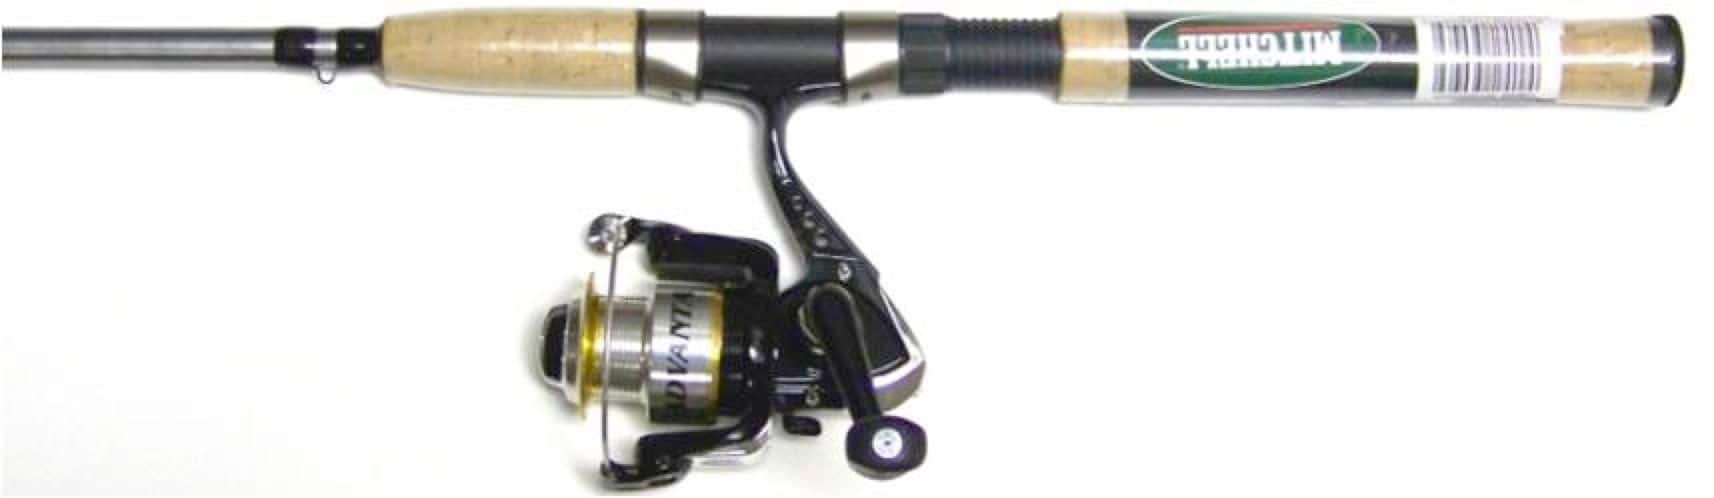 Bullet Spincast Fishing Reel, 8+1 Ball Bearings with an Ultra